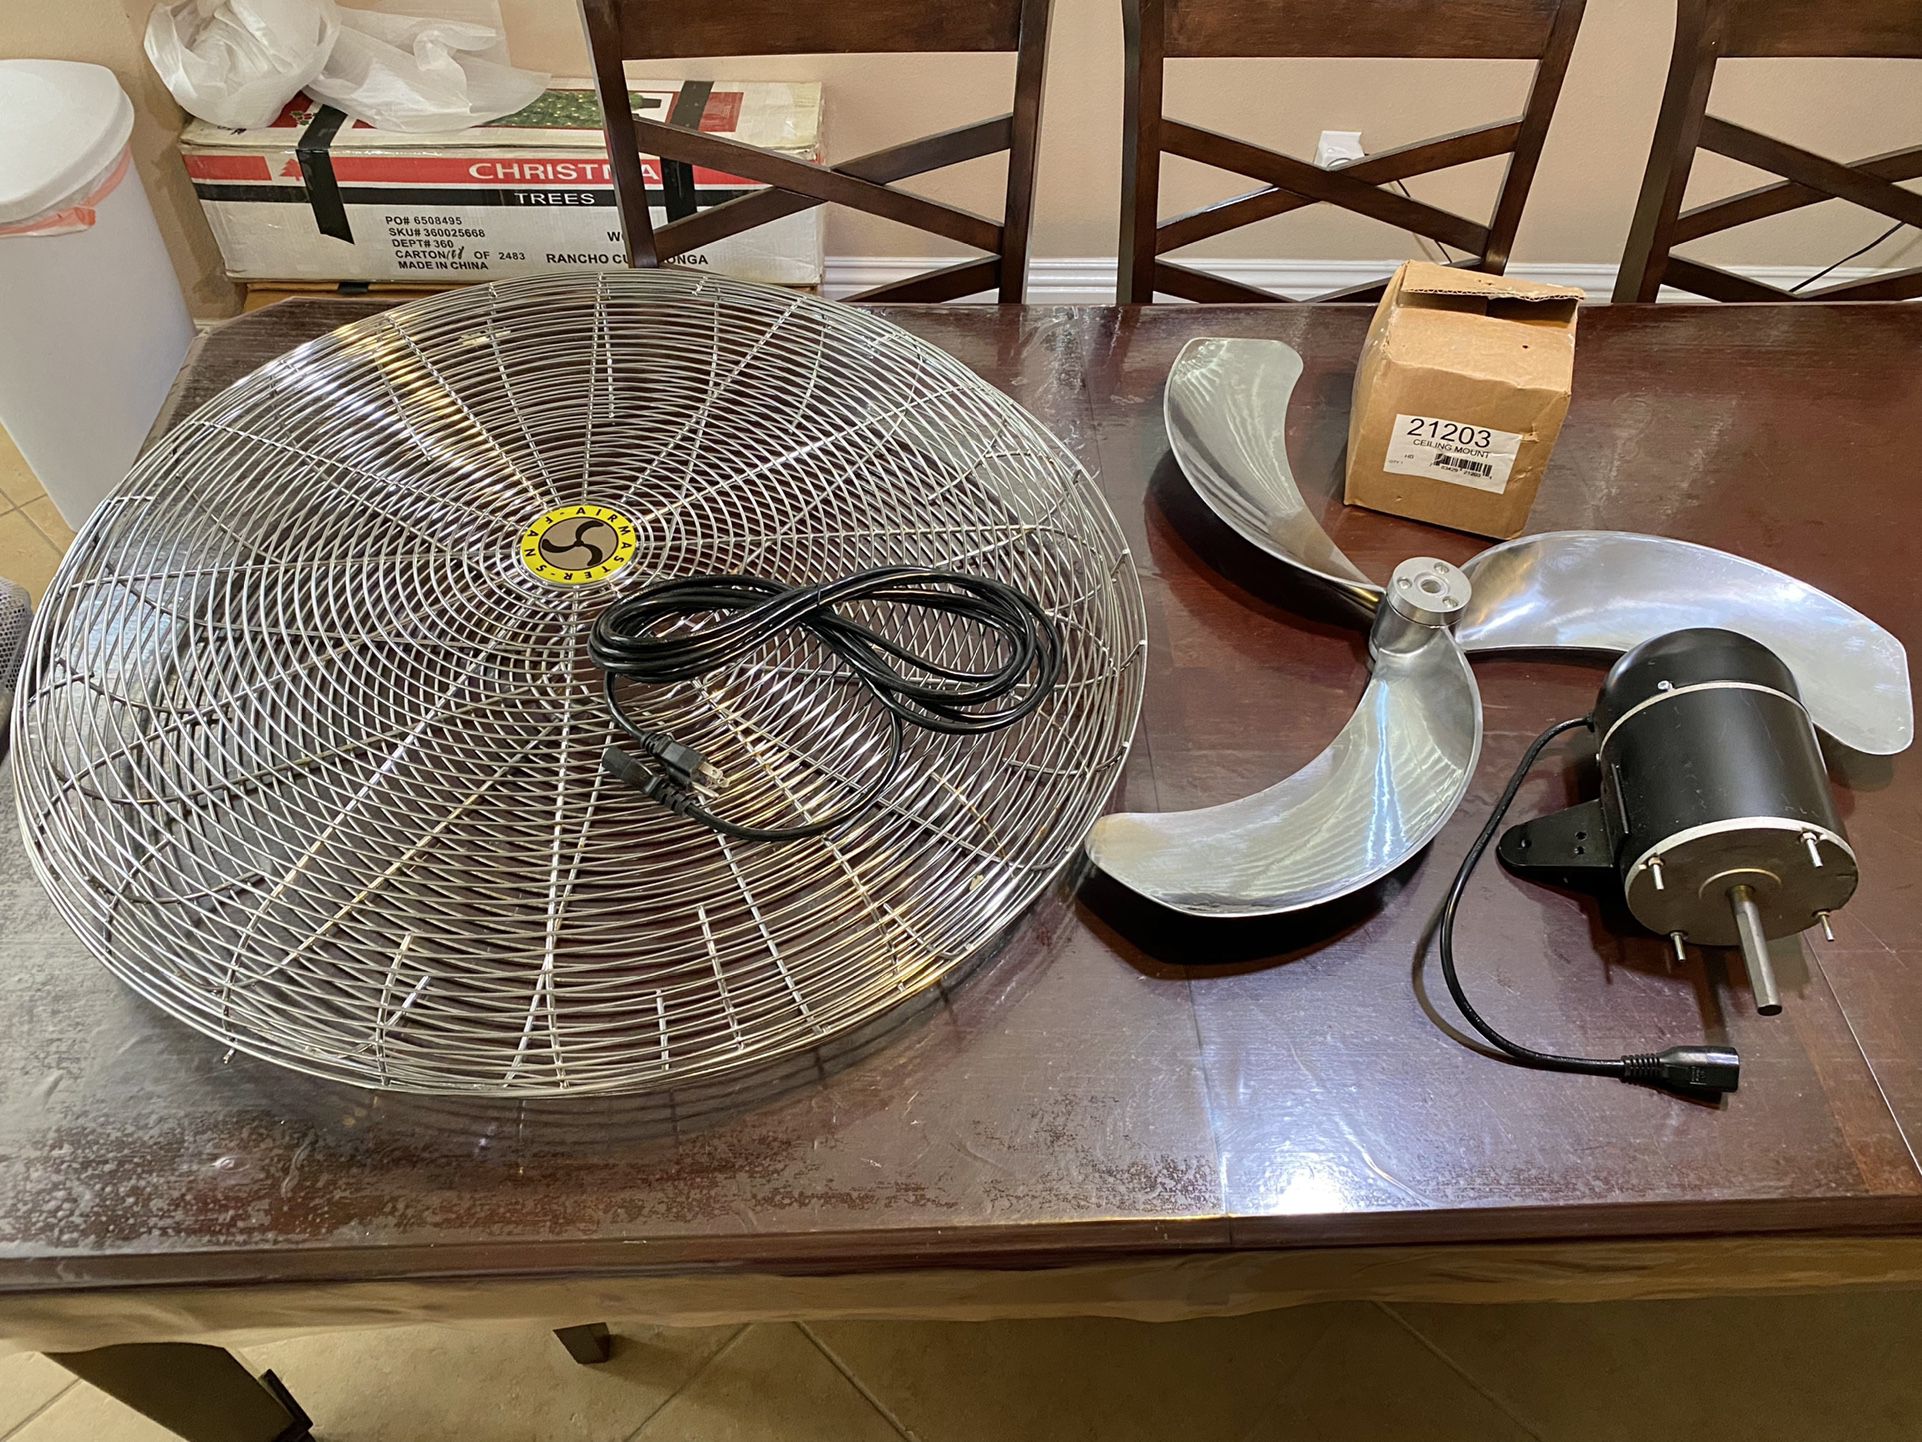 Air Master 30” Industrial Fan for Sale in Corona, CA - OfferUp